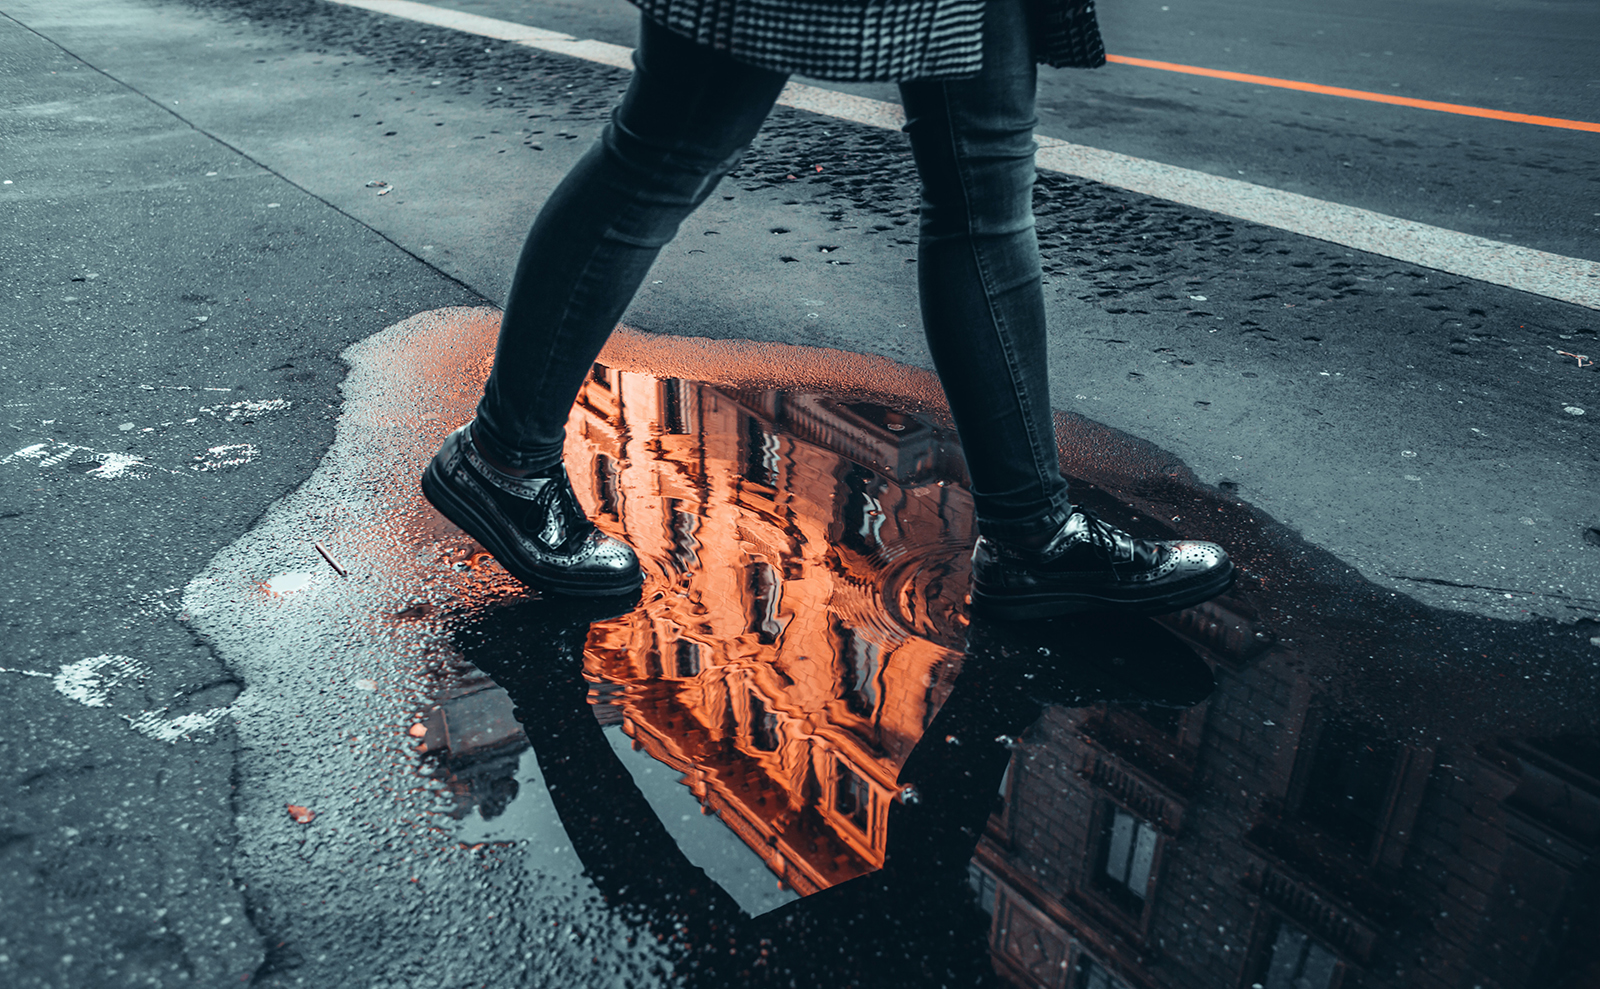 black pavement with the reflection of a building in a puddle of water